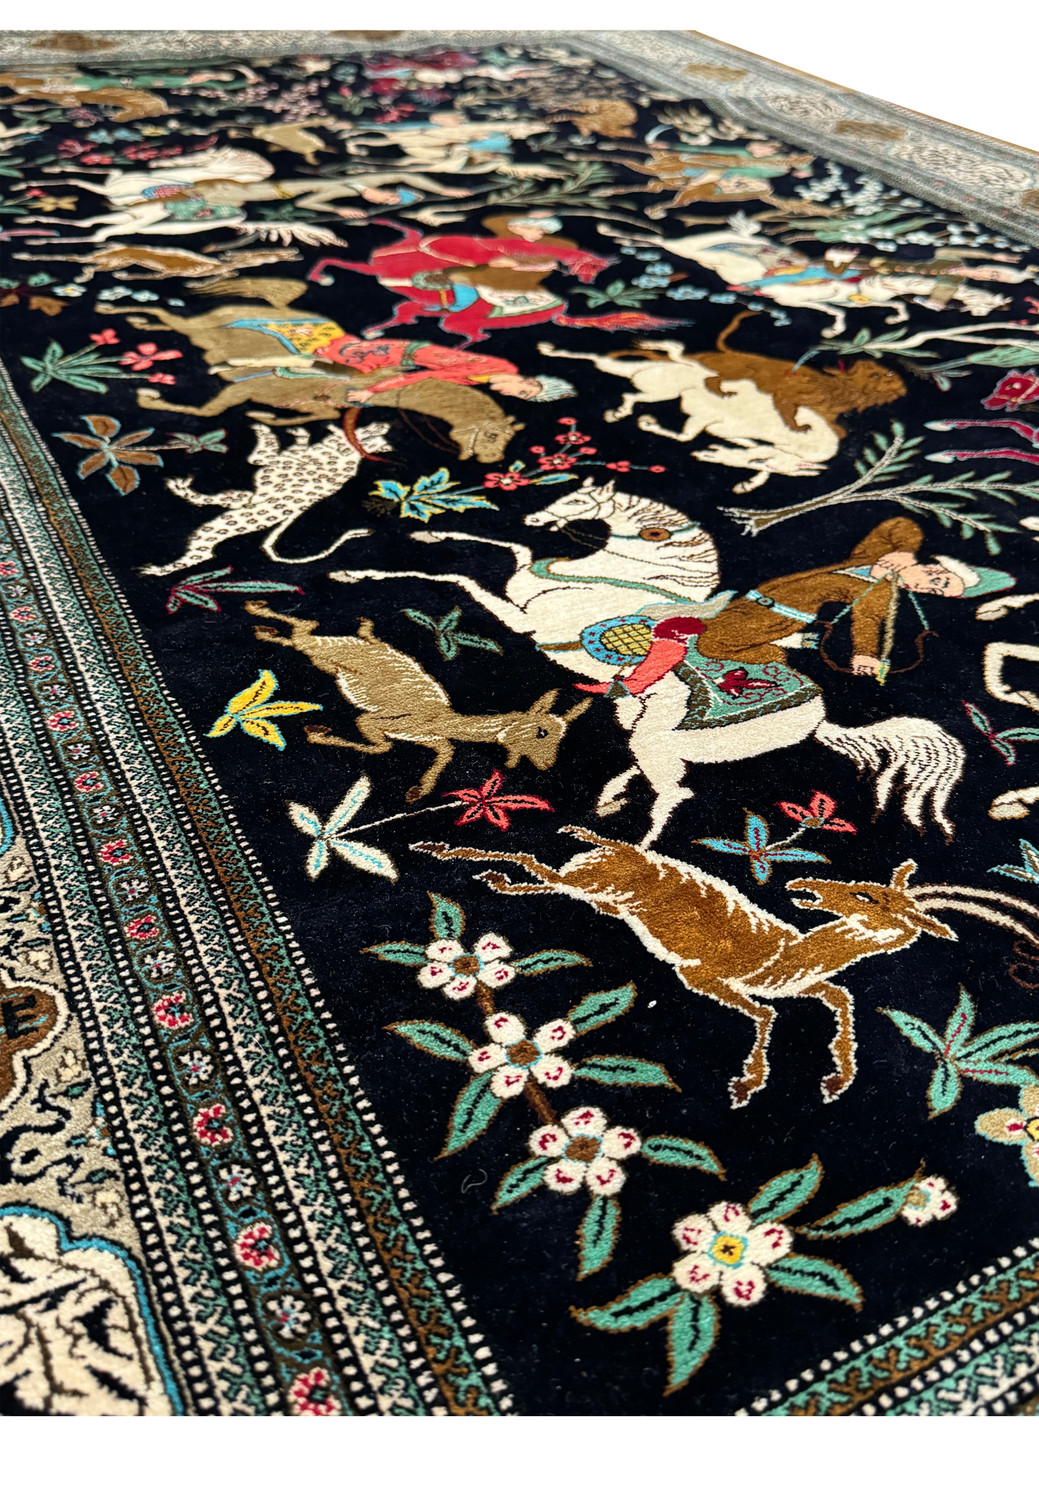 Longitudinal view of Persian Qum Silk Hunting Rug showing the full flow of the hunting scene and parallel border design